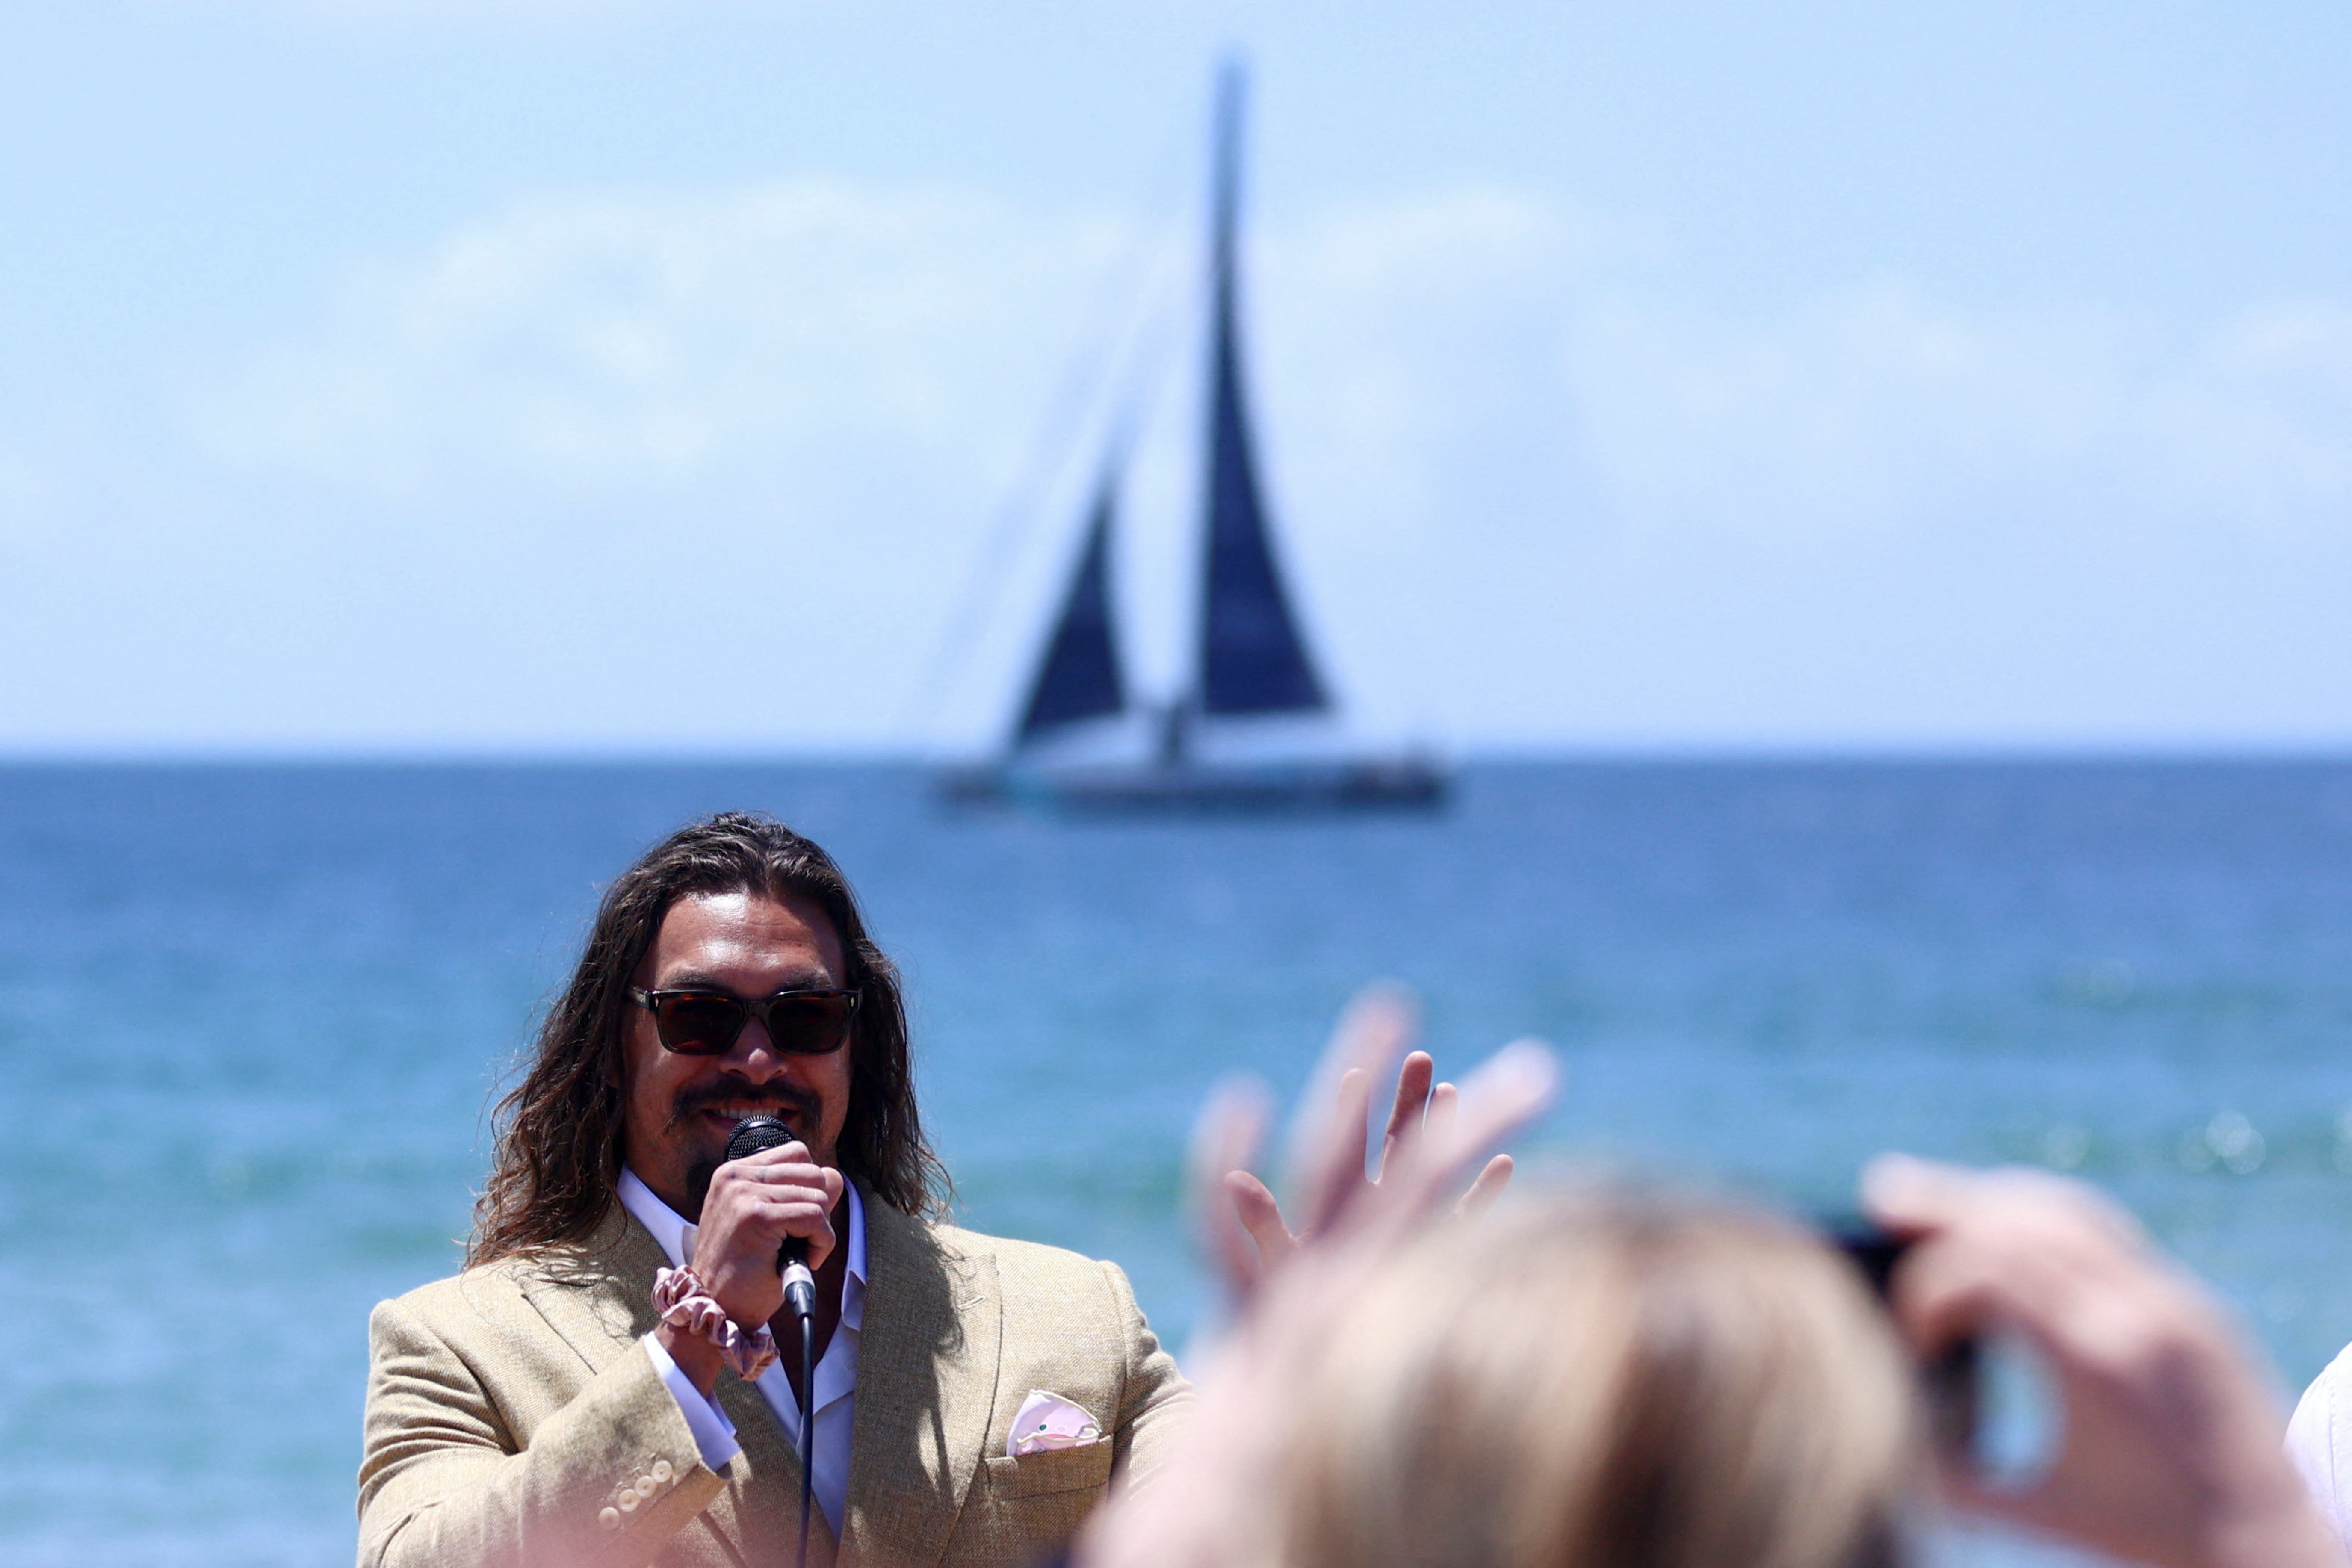 American actor and environmental activist Jason Momoa makes an appearance at a Portuguese Carcavelos beach ahead of the United Nations Ocean Conference in Lisbon